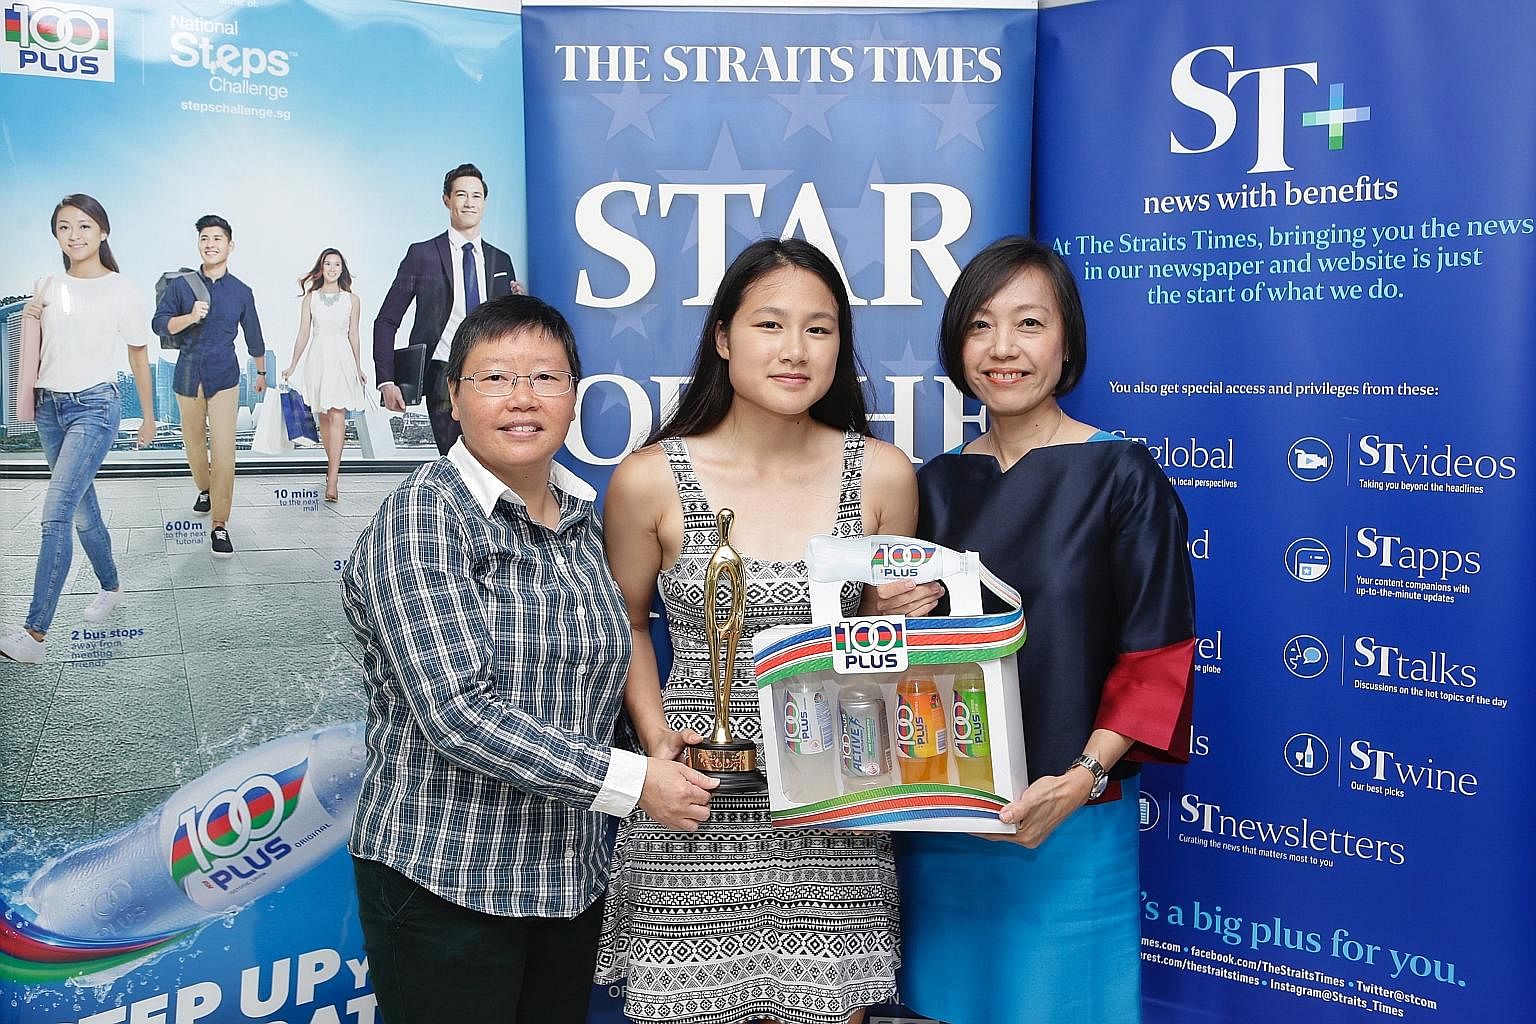 Cheyenne Goh, with ST sports editor Lee Yulin (left) and F&N Foods general manager Jennifer See, proudly holding her trophy and hamper for being the ST Star of the Month for November. She qualified for the Winter Games mainly on the strength of her 2